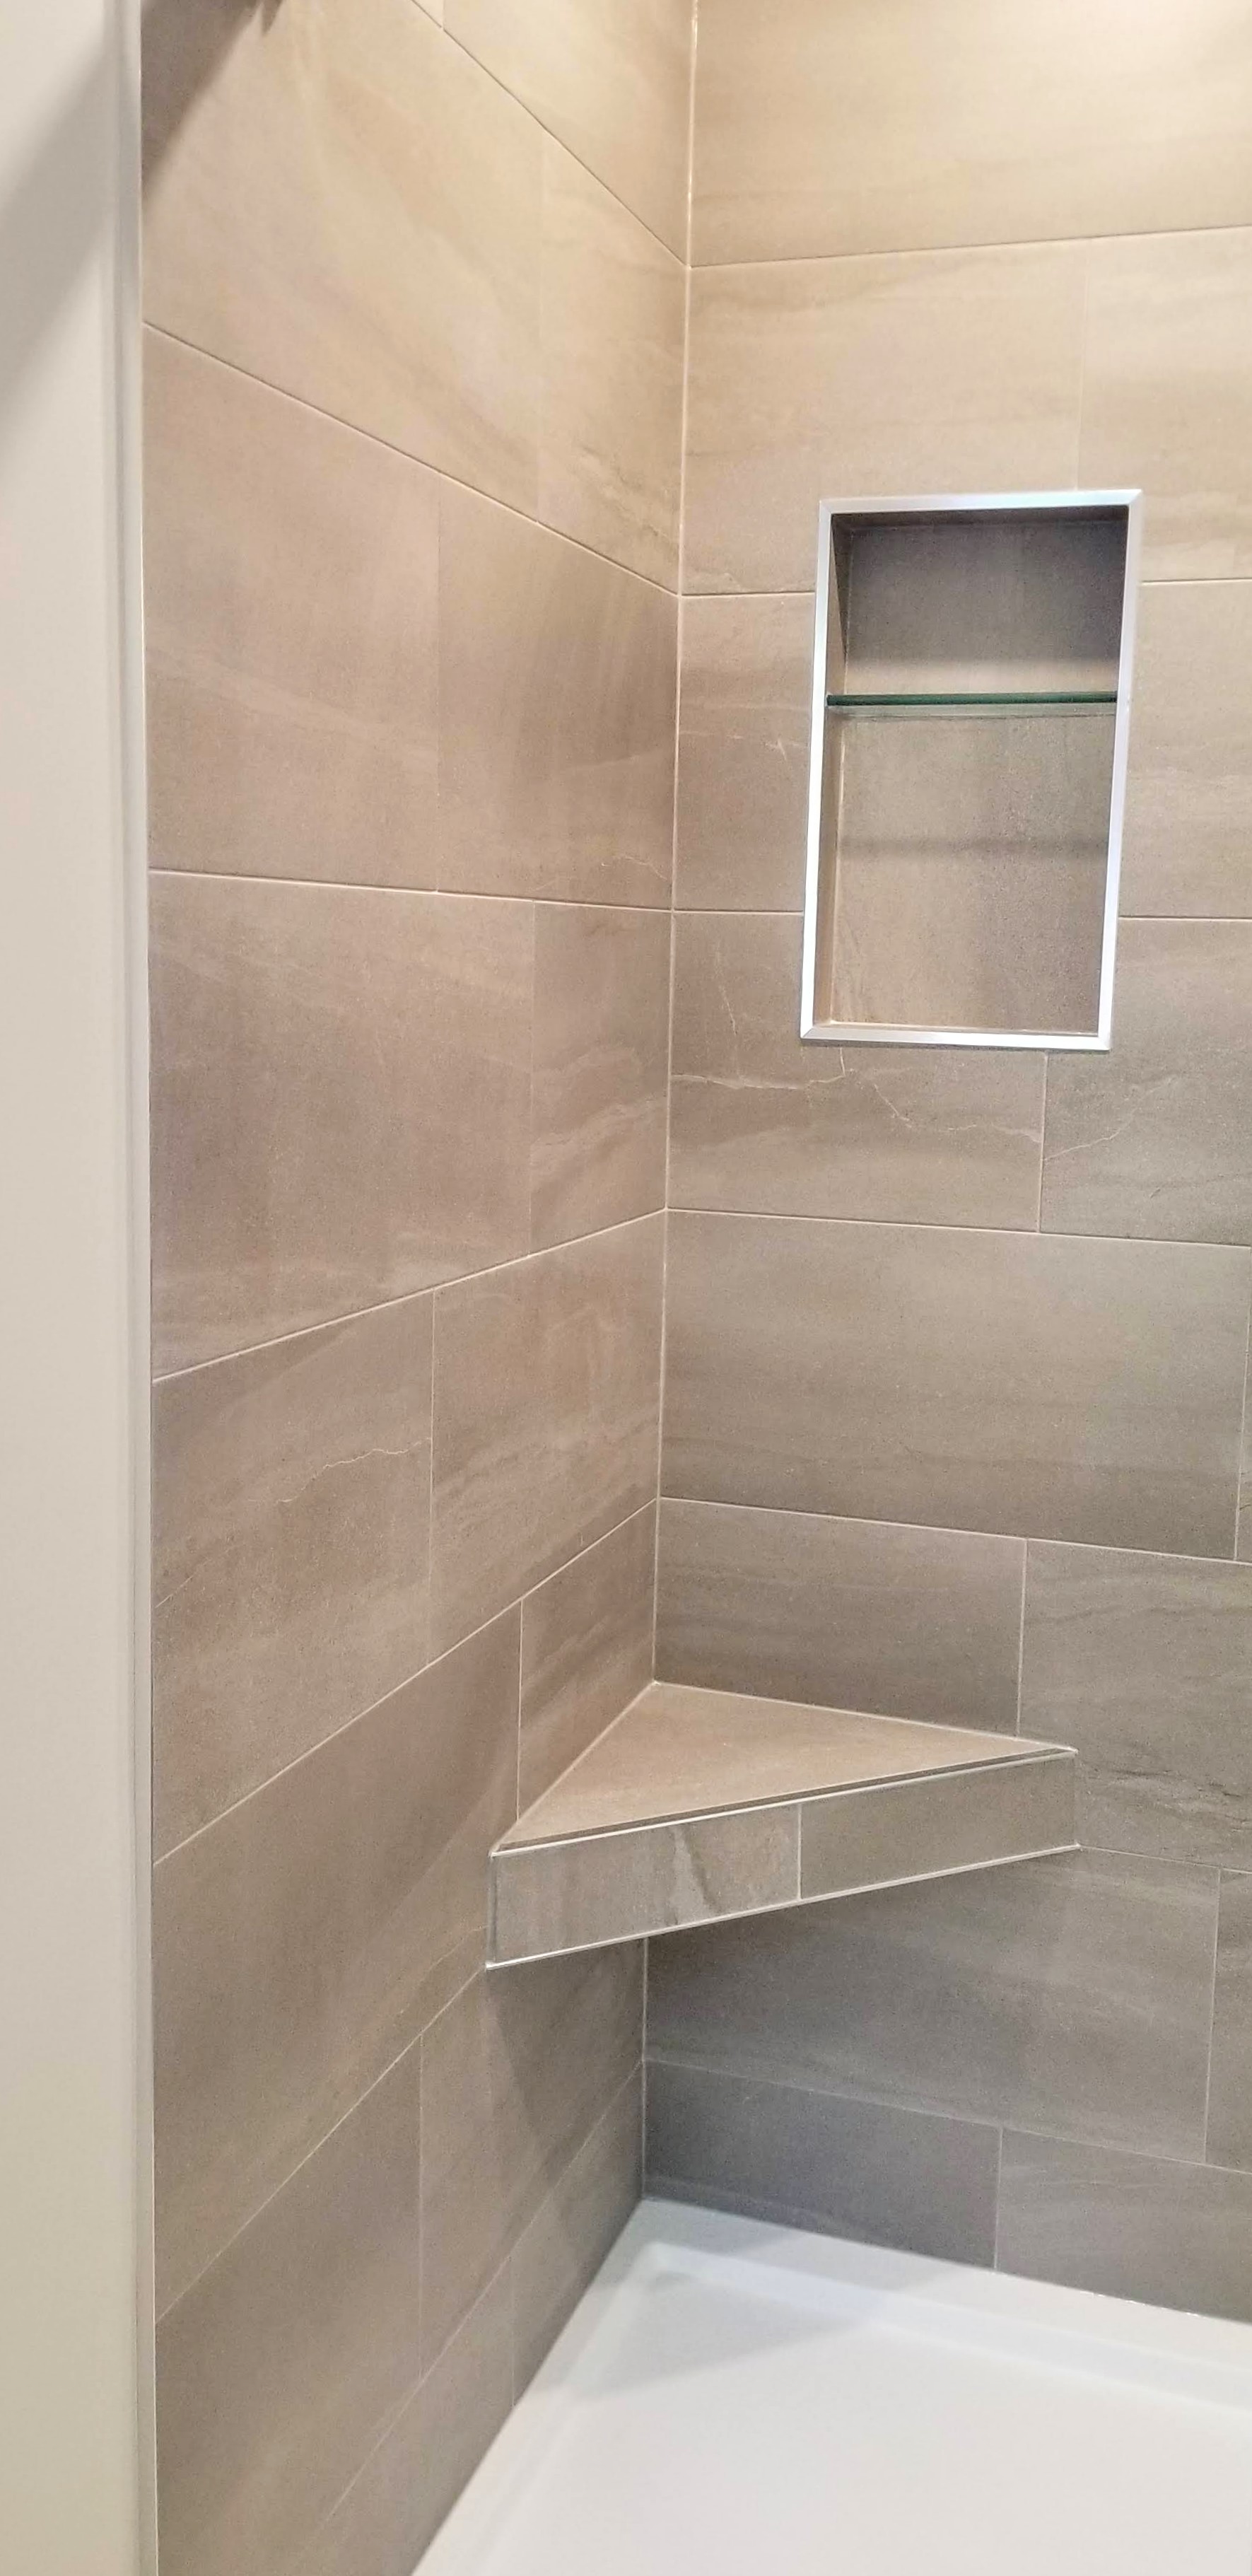 Tiled floating shower bench in tiled shower by Germano Creative Interior Contracting Ltd.